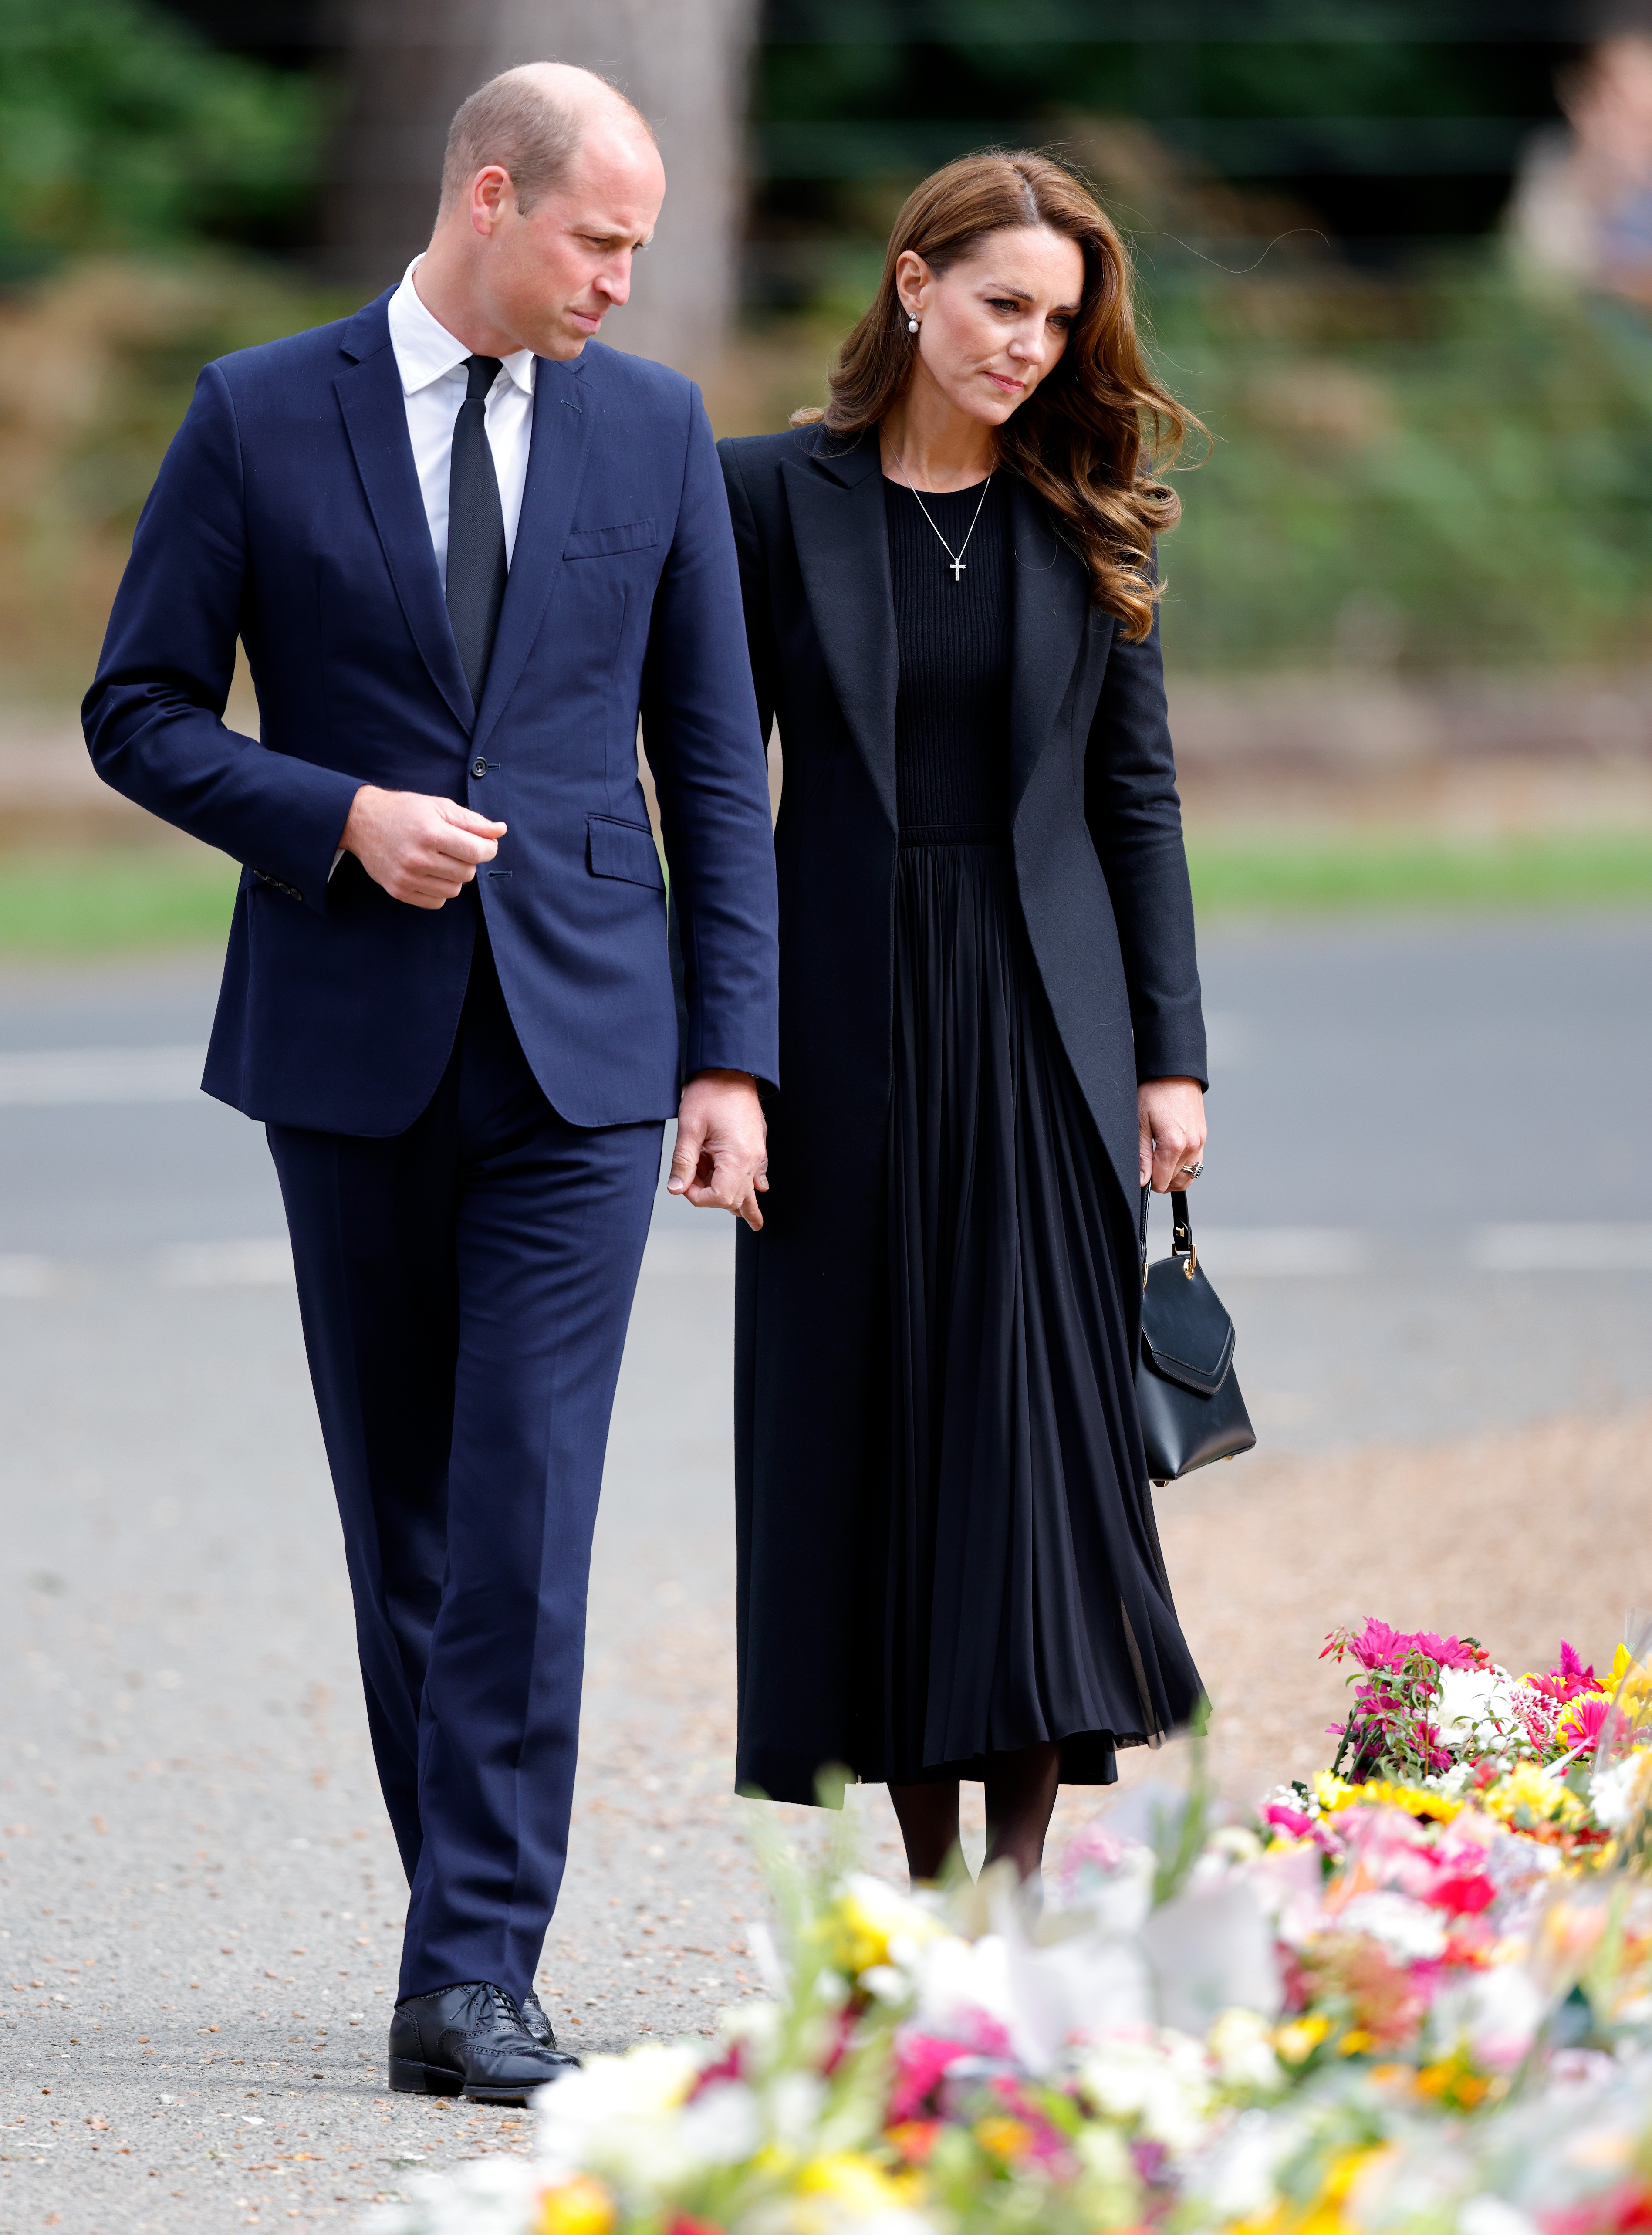 SANDRINGHAM, NORFOLK - SEPTEMBER 15: (EMBARGOED FOR PUBLICATION IN UK NEWSPAPERS UNTIL 24 HOURS AFTER CREATE DATE AND TIME) Prince William, Prince of Wales and Catherine, Princess of Wales view floral tributes left at the entrance to Sandringham House, th (Foto: Getty Images)